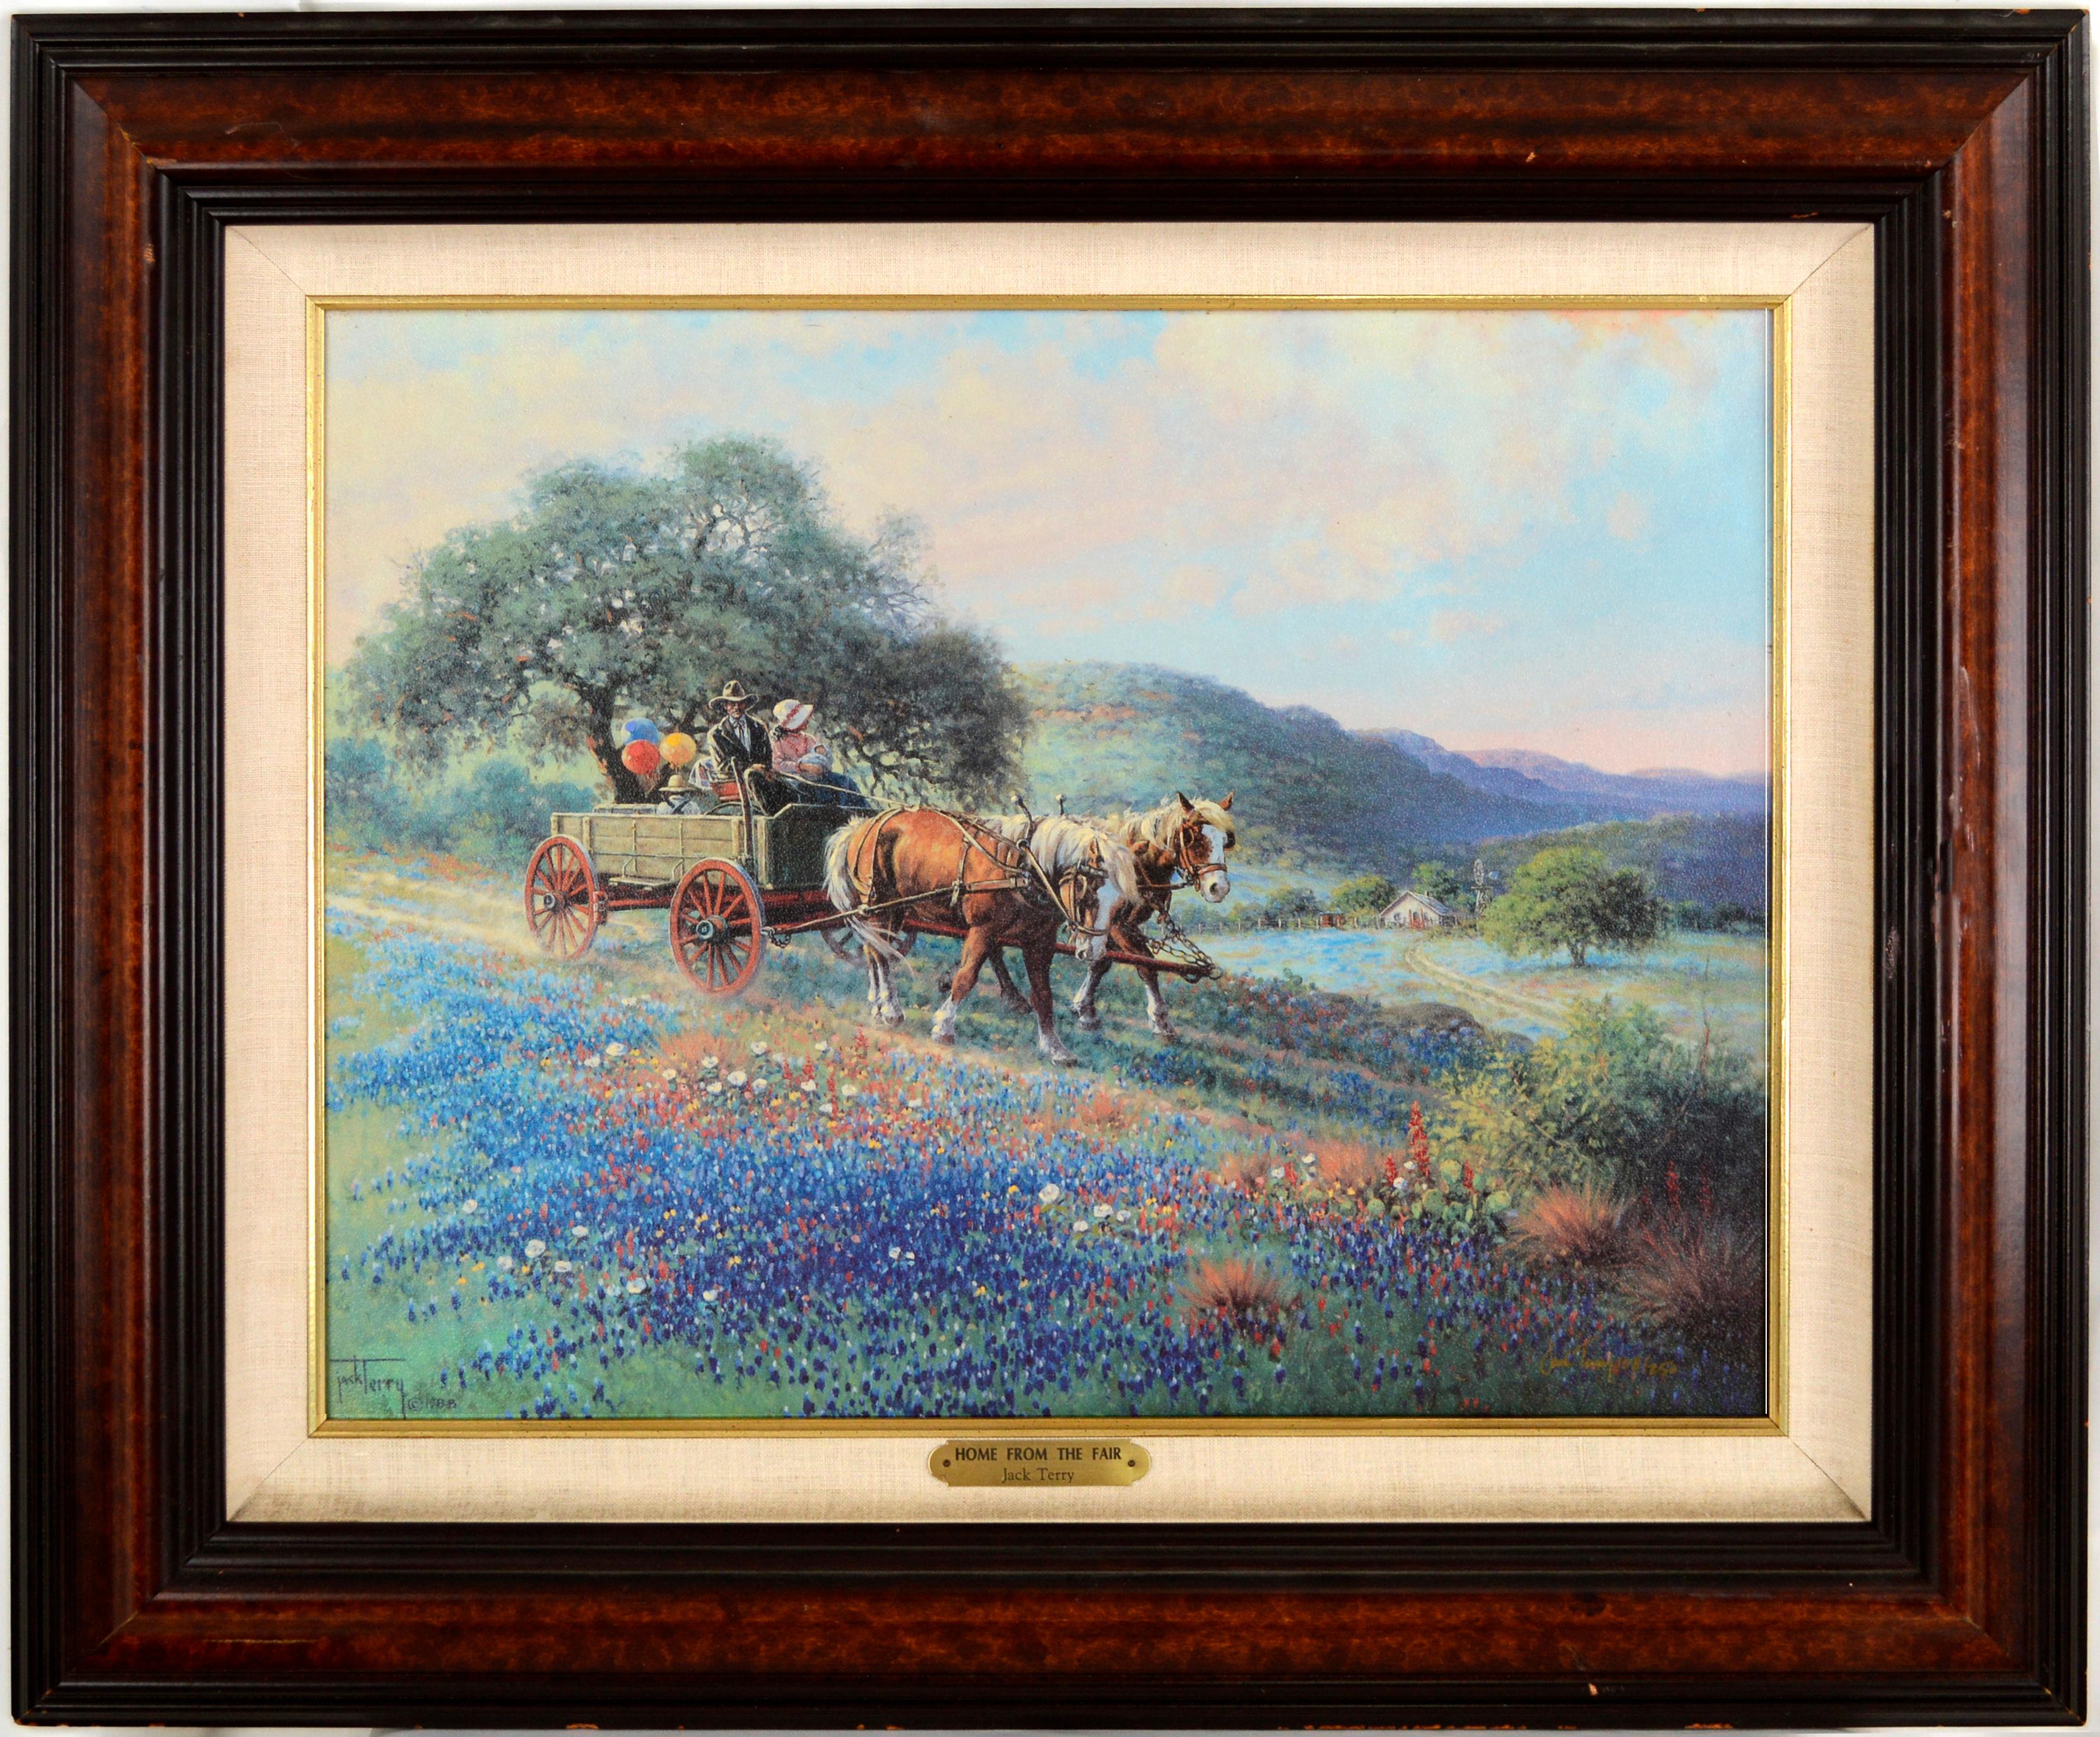 "Home from the Fair" Wagon and Horses Print on Canvas